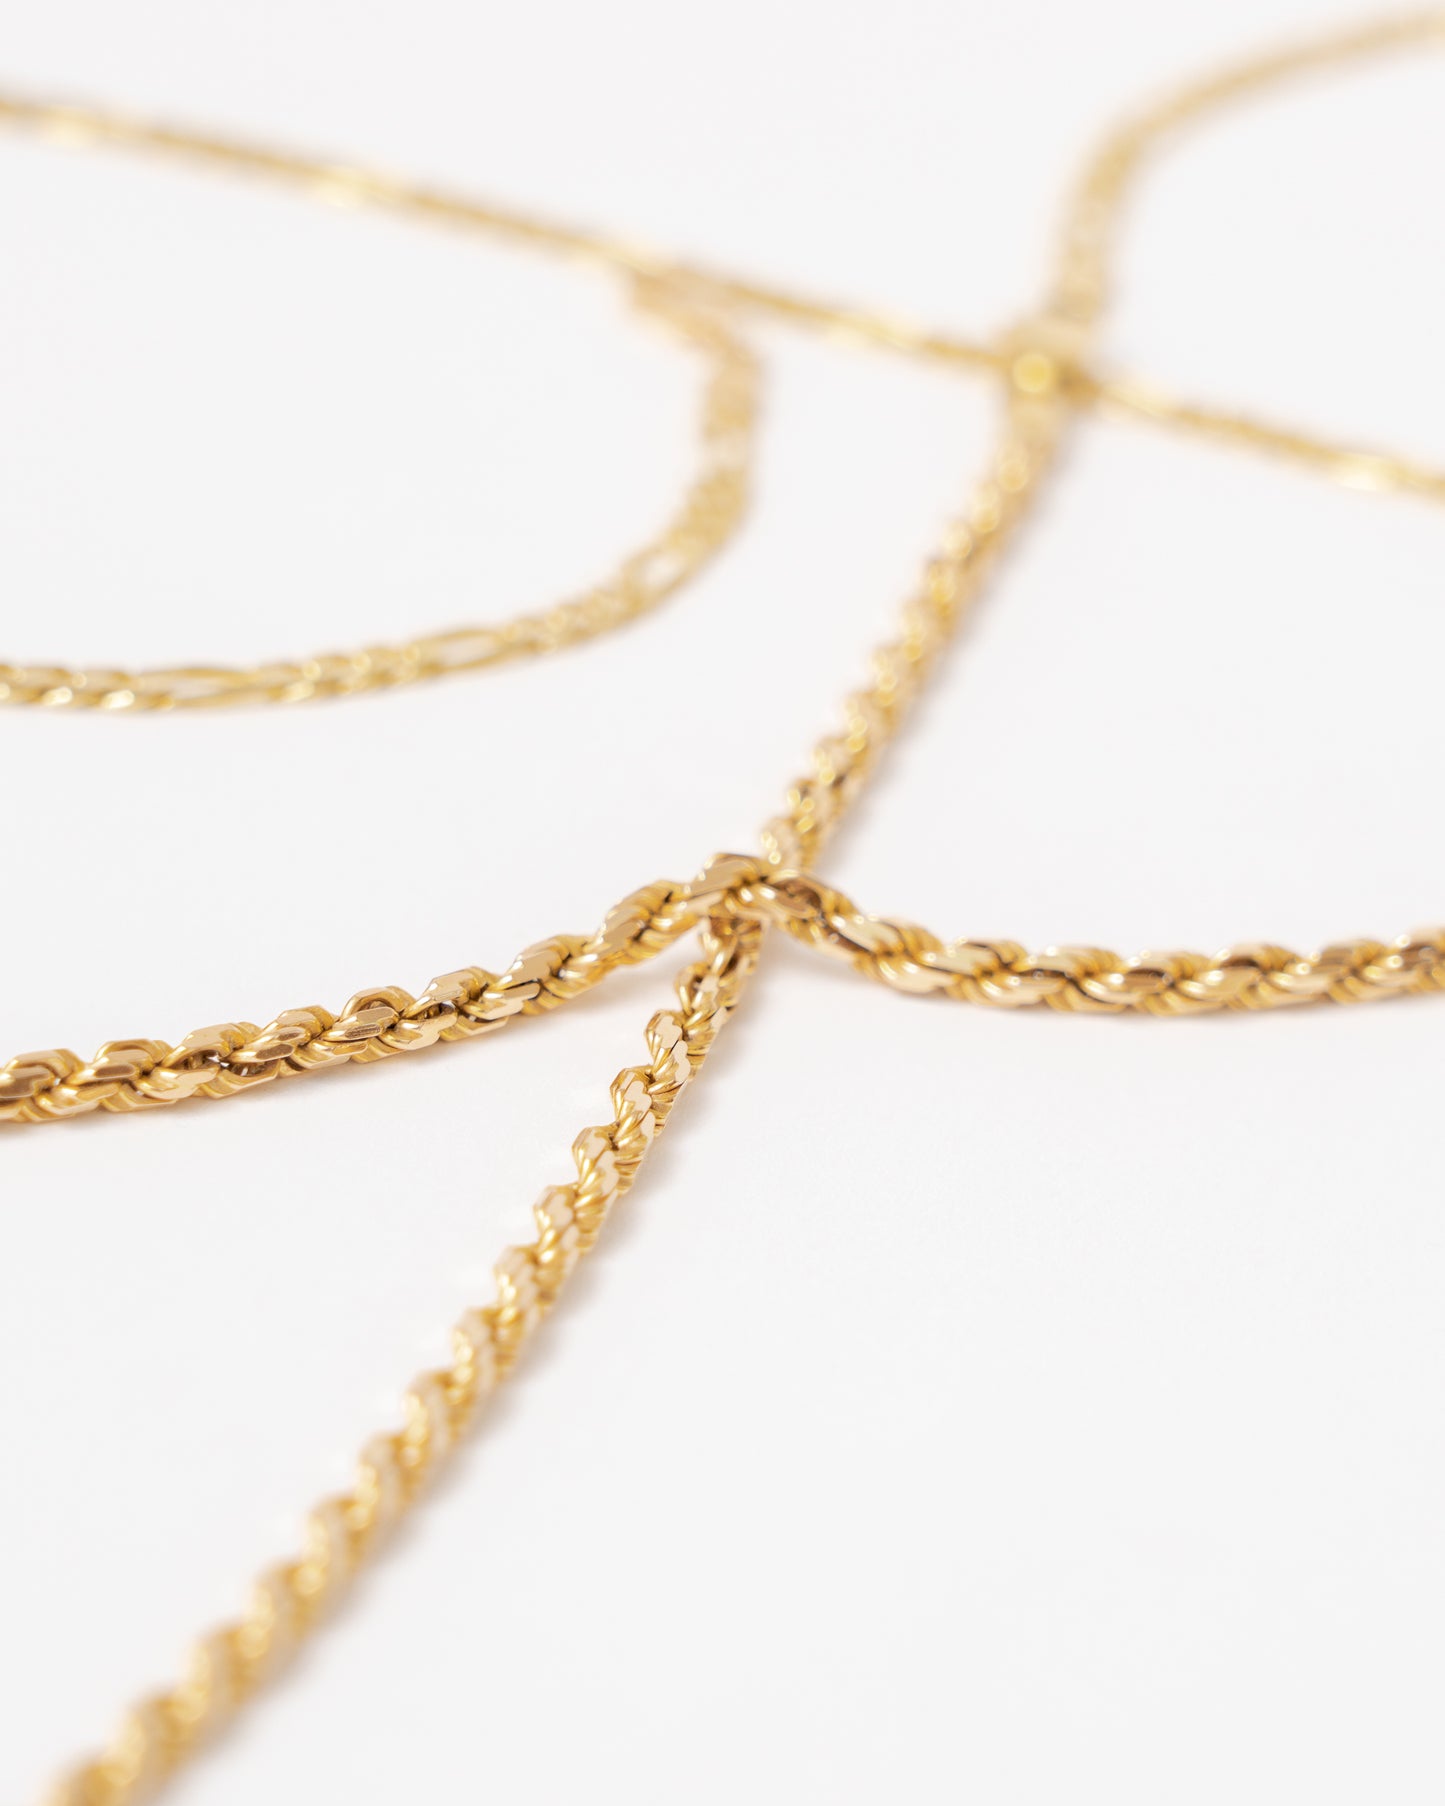 20" Rope Necklace - 14K Gold